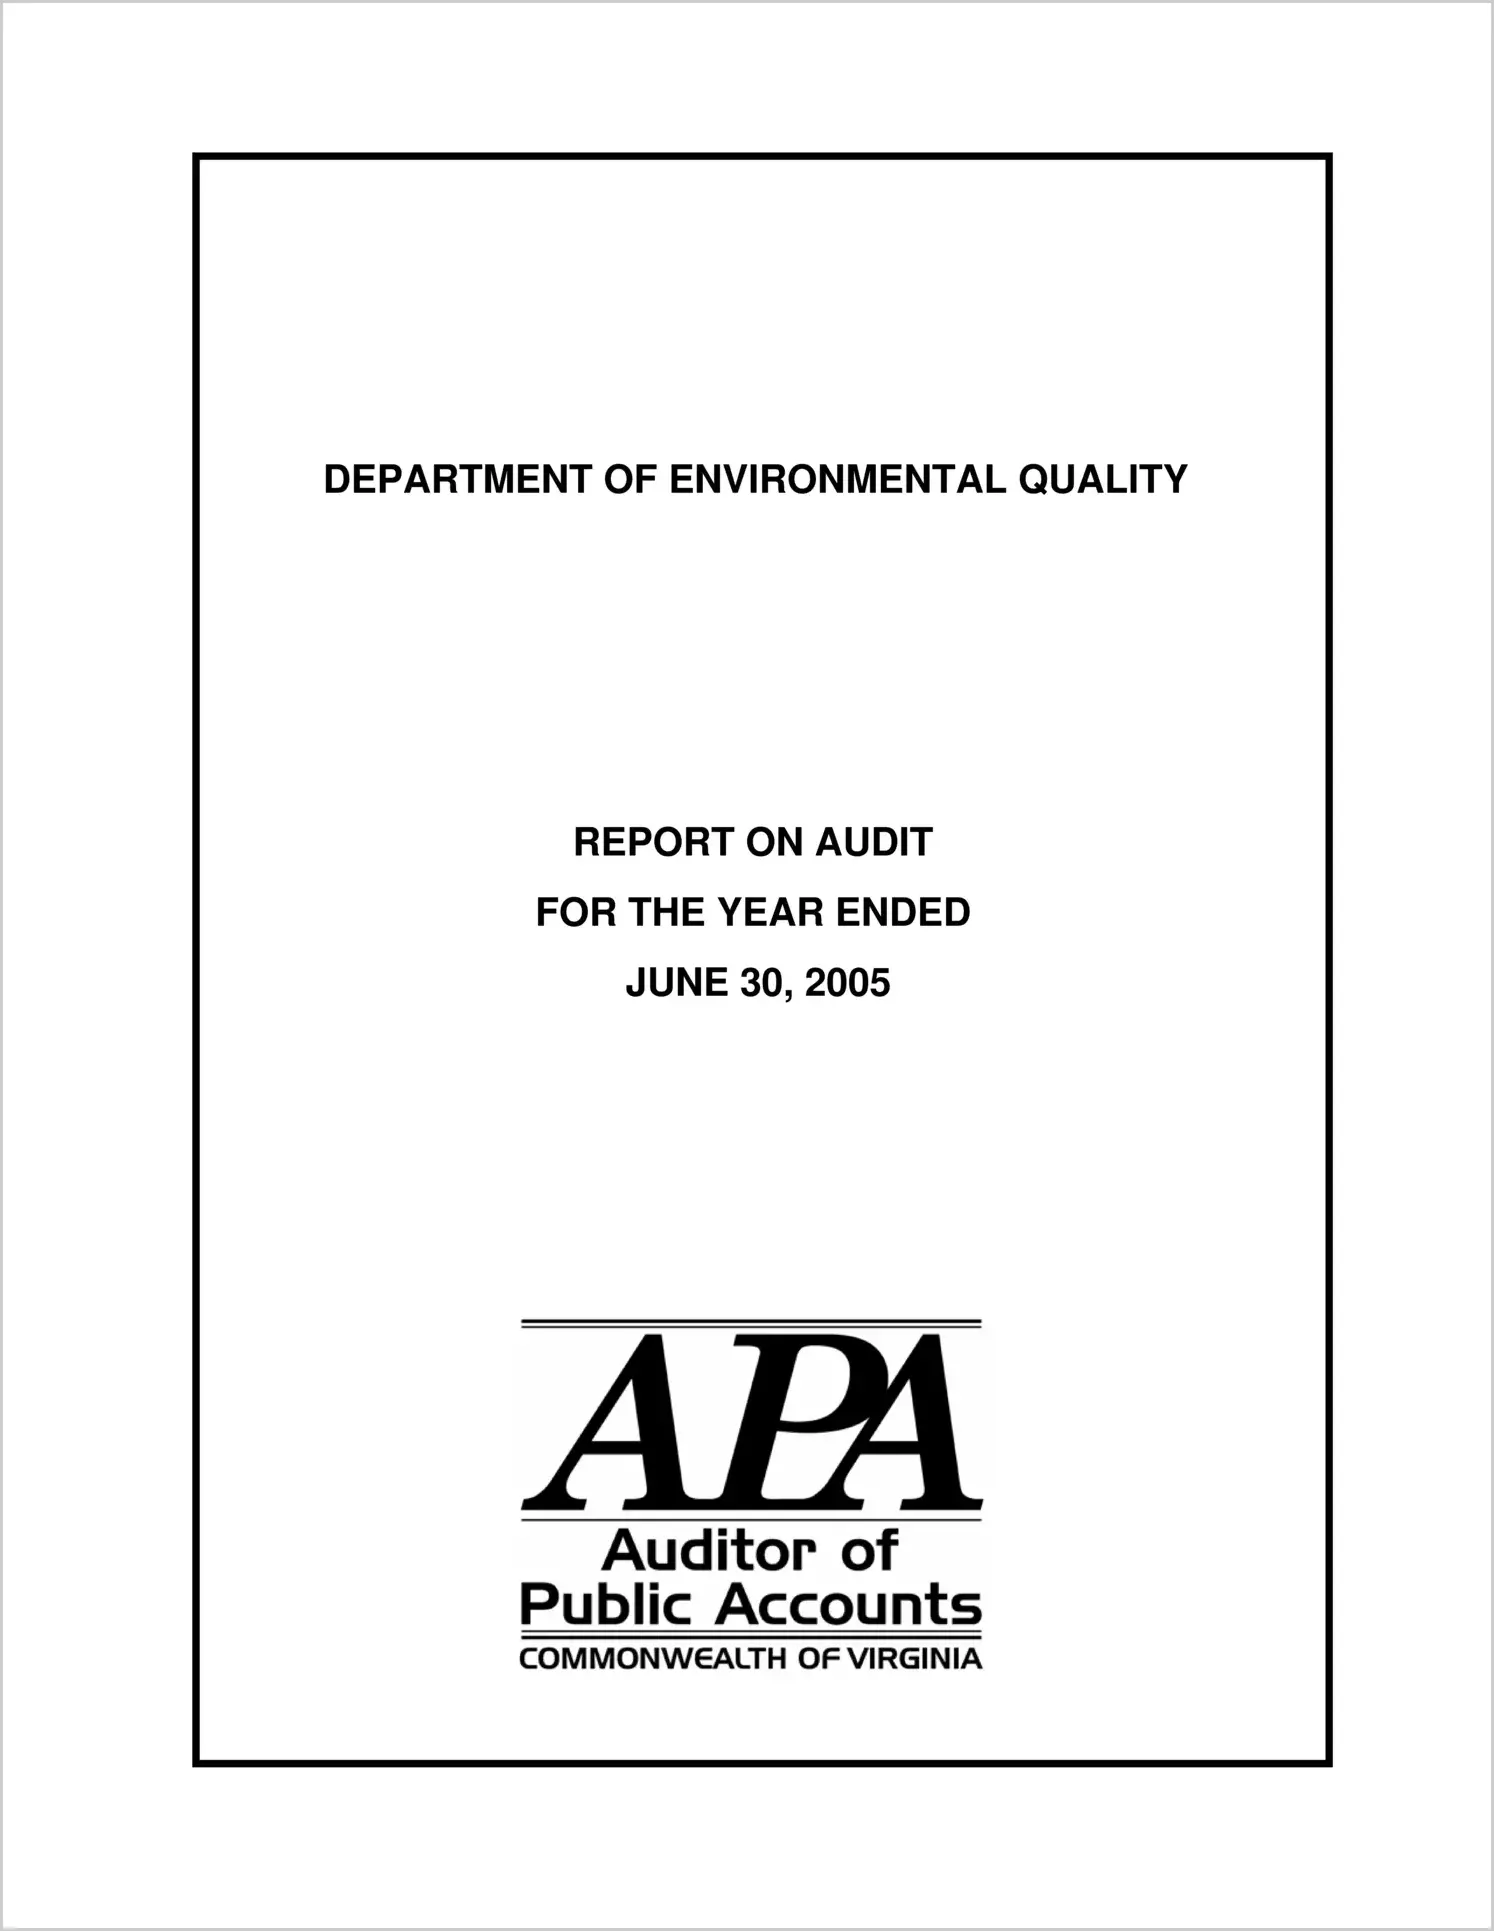 Department of Environmental Quality for the year ended June 30, 2005